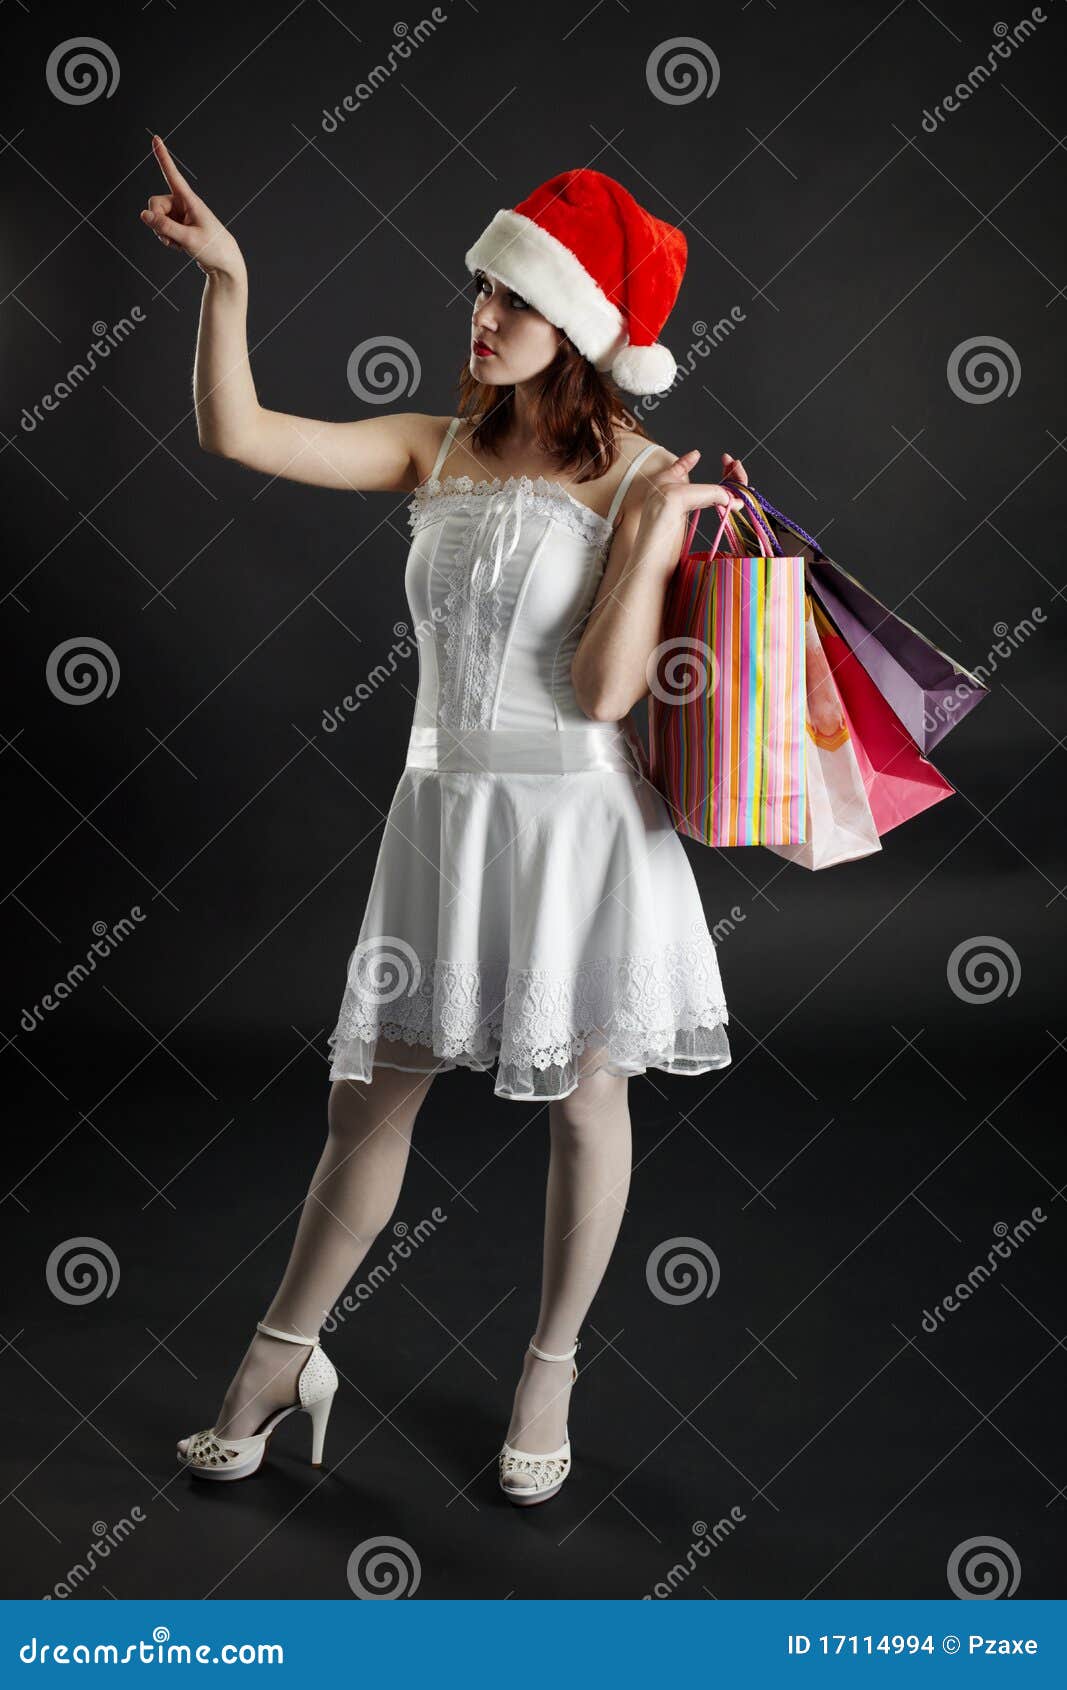 woman in new year's cap chooses purchases